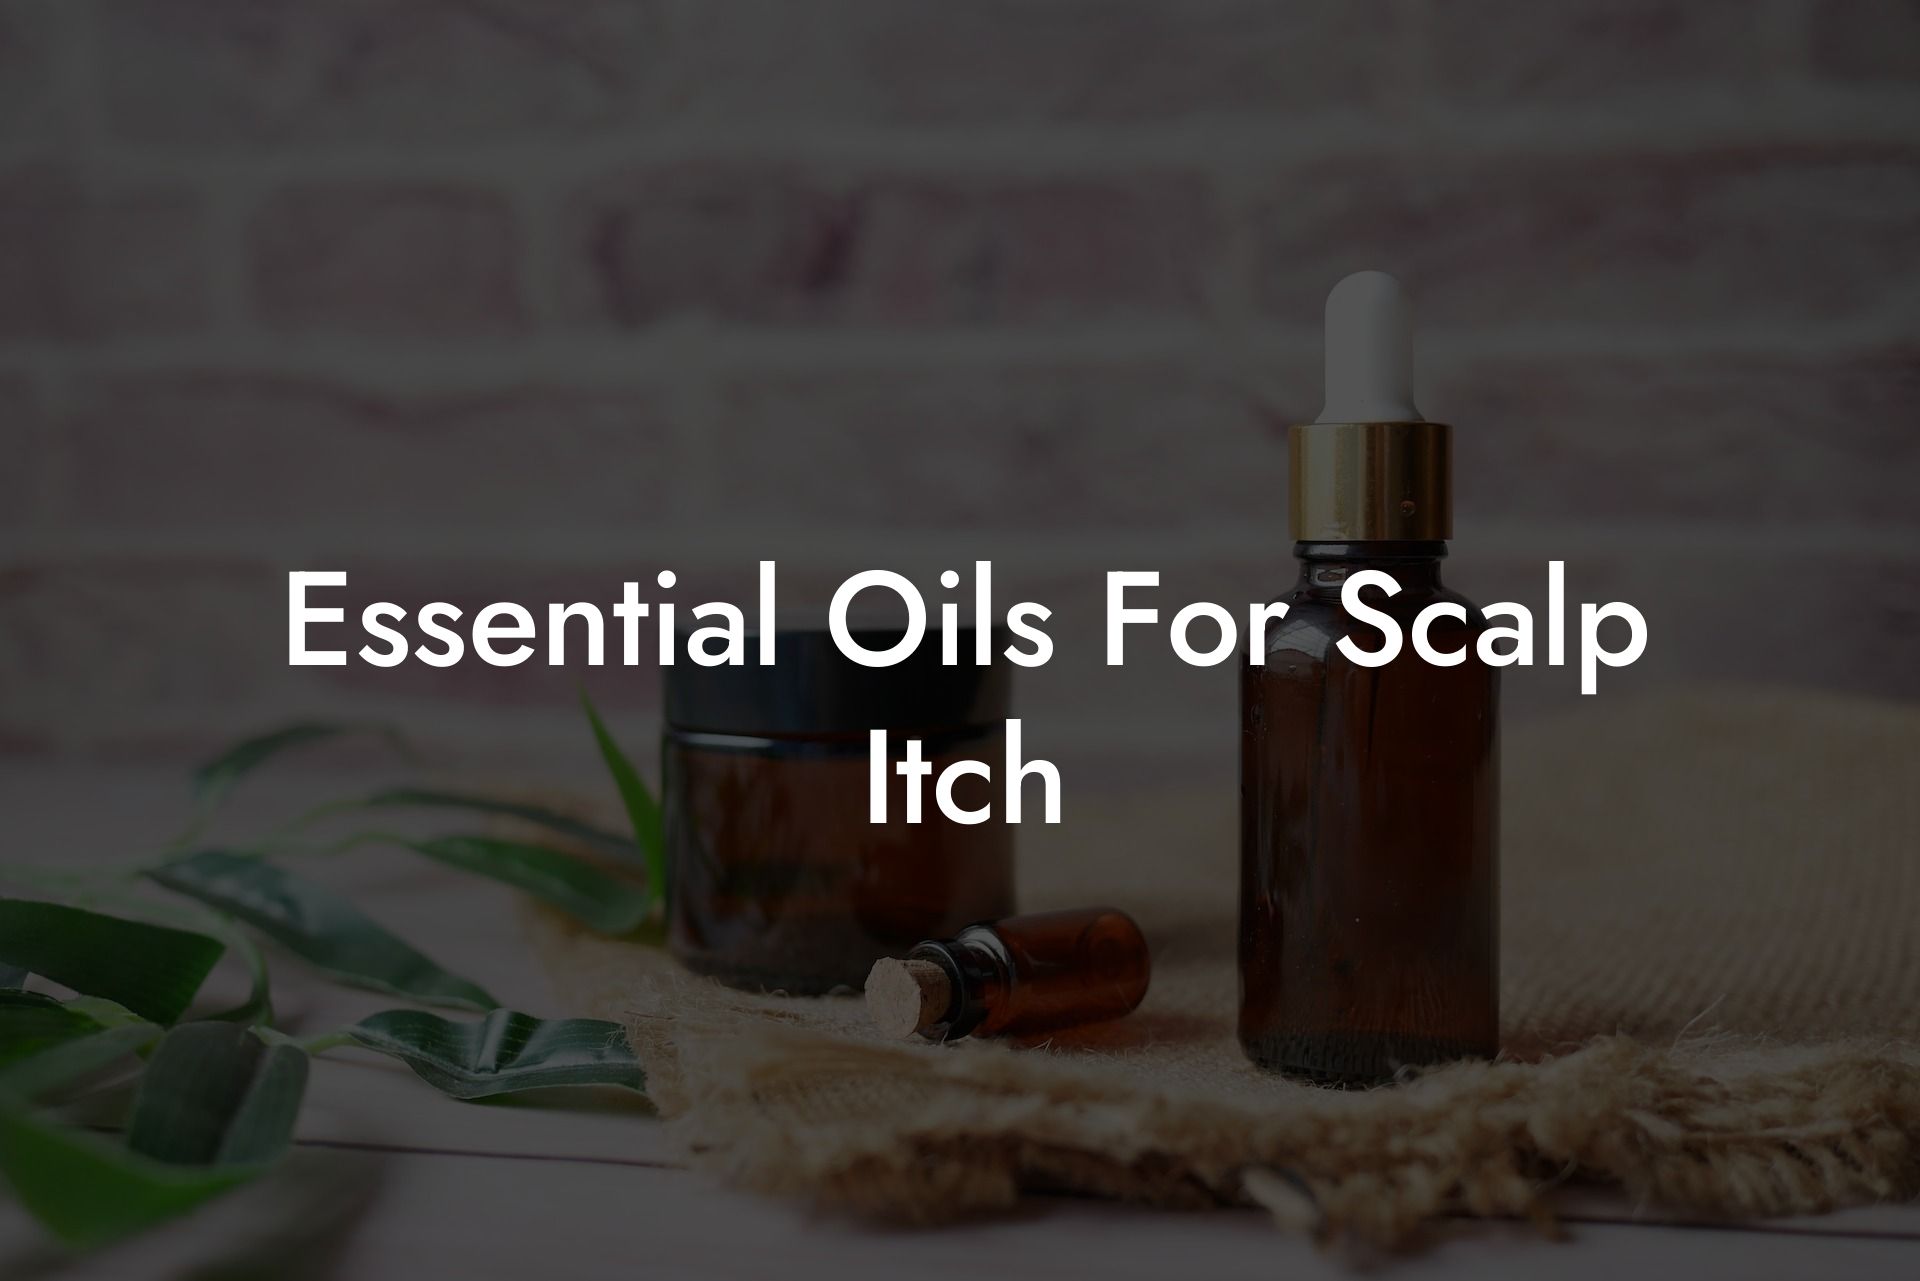 Essential Oils For Scalp Itch